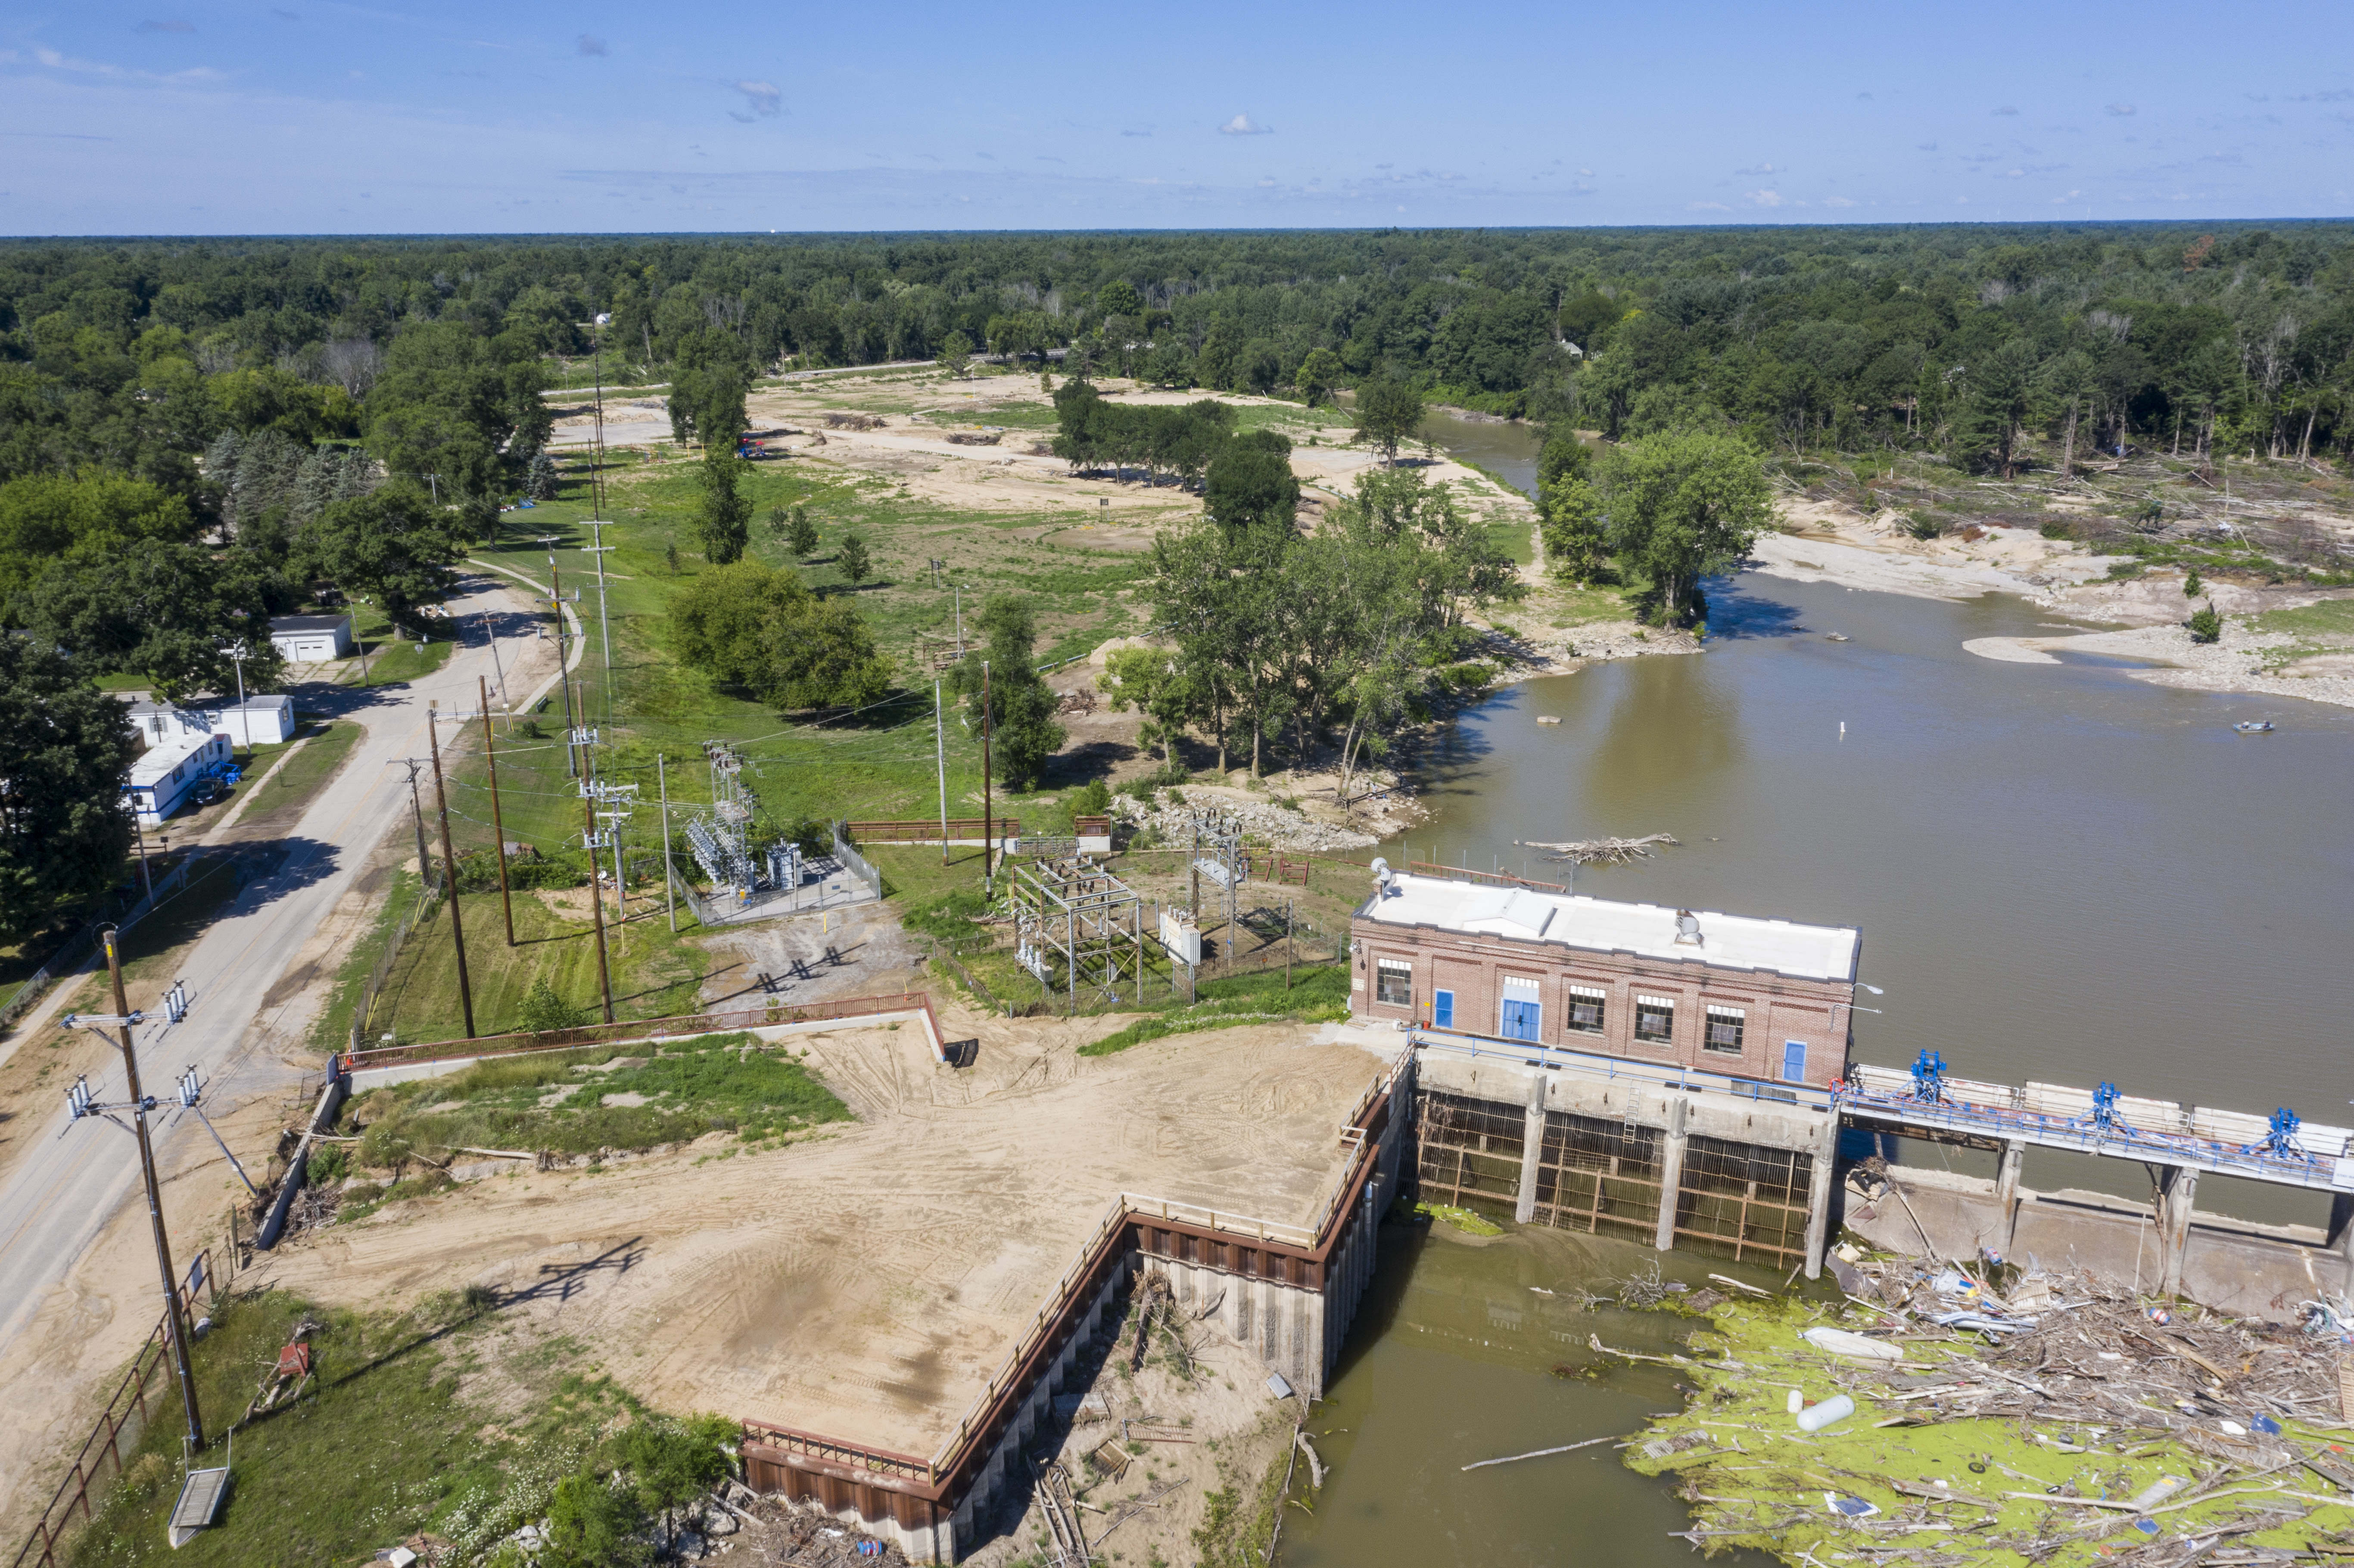 A view of the Sanford Dam in Sanford on Thursday, July 30, 2020. The devastating flood in May gushed over the majority of land in this area. (Kaytie Boomer | MLive.com)